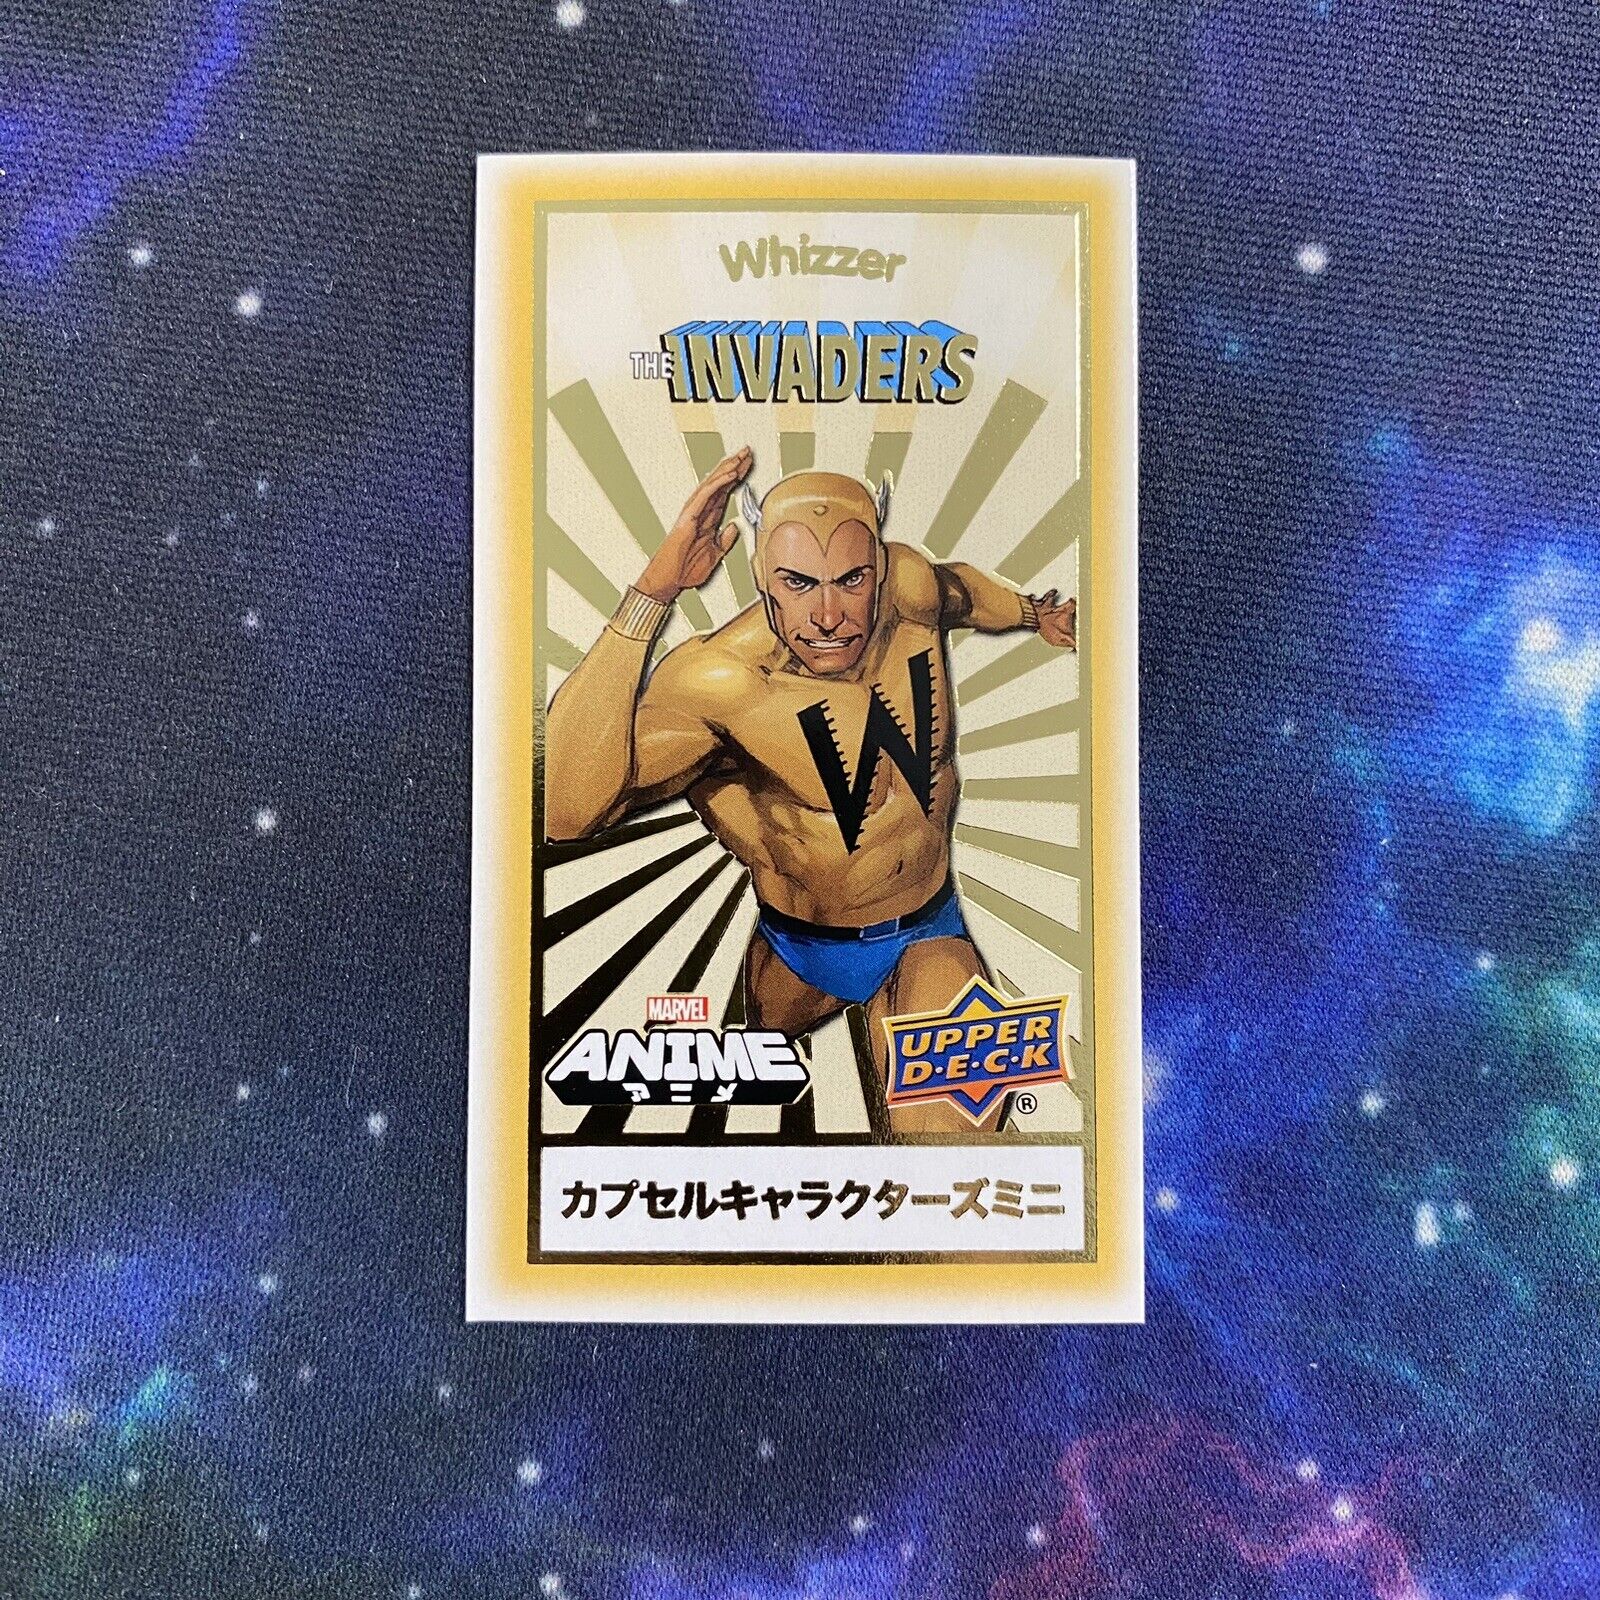 CCM-31 WHIZZER 2020 Upper Deck Marvel Anime CAPSULE CHARACTER GOLD MINI INVADERS